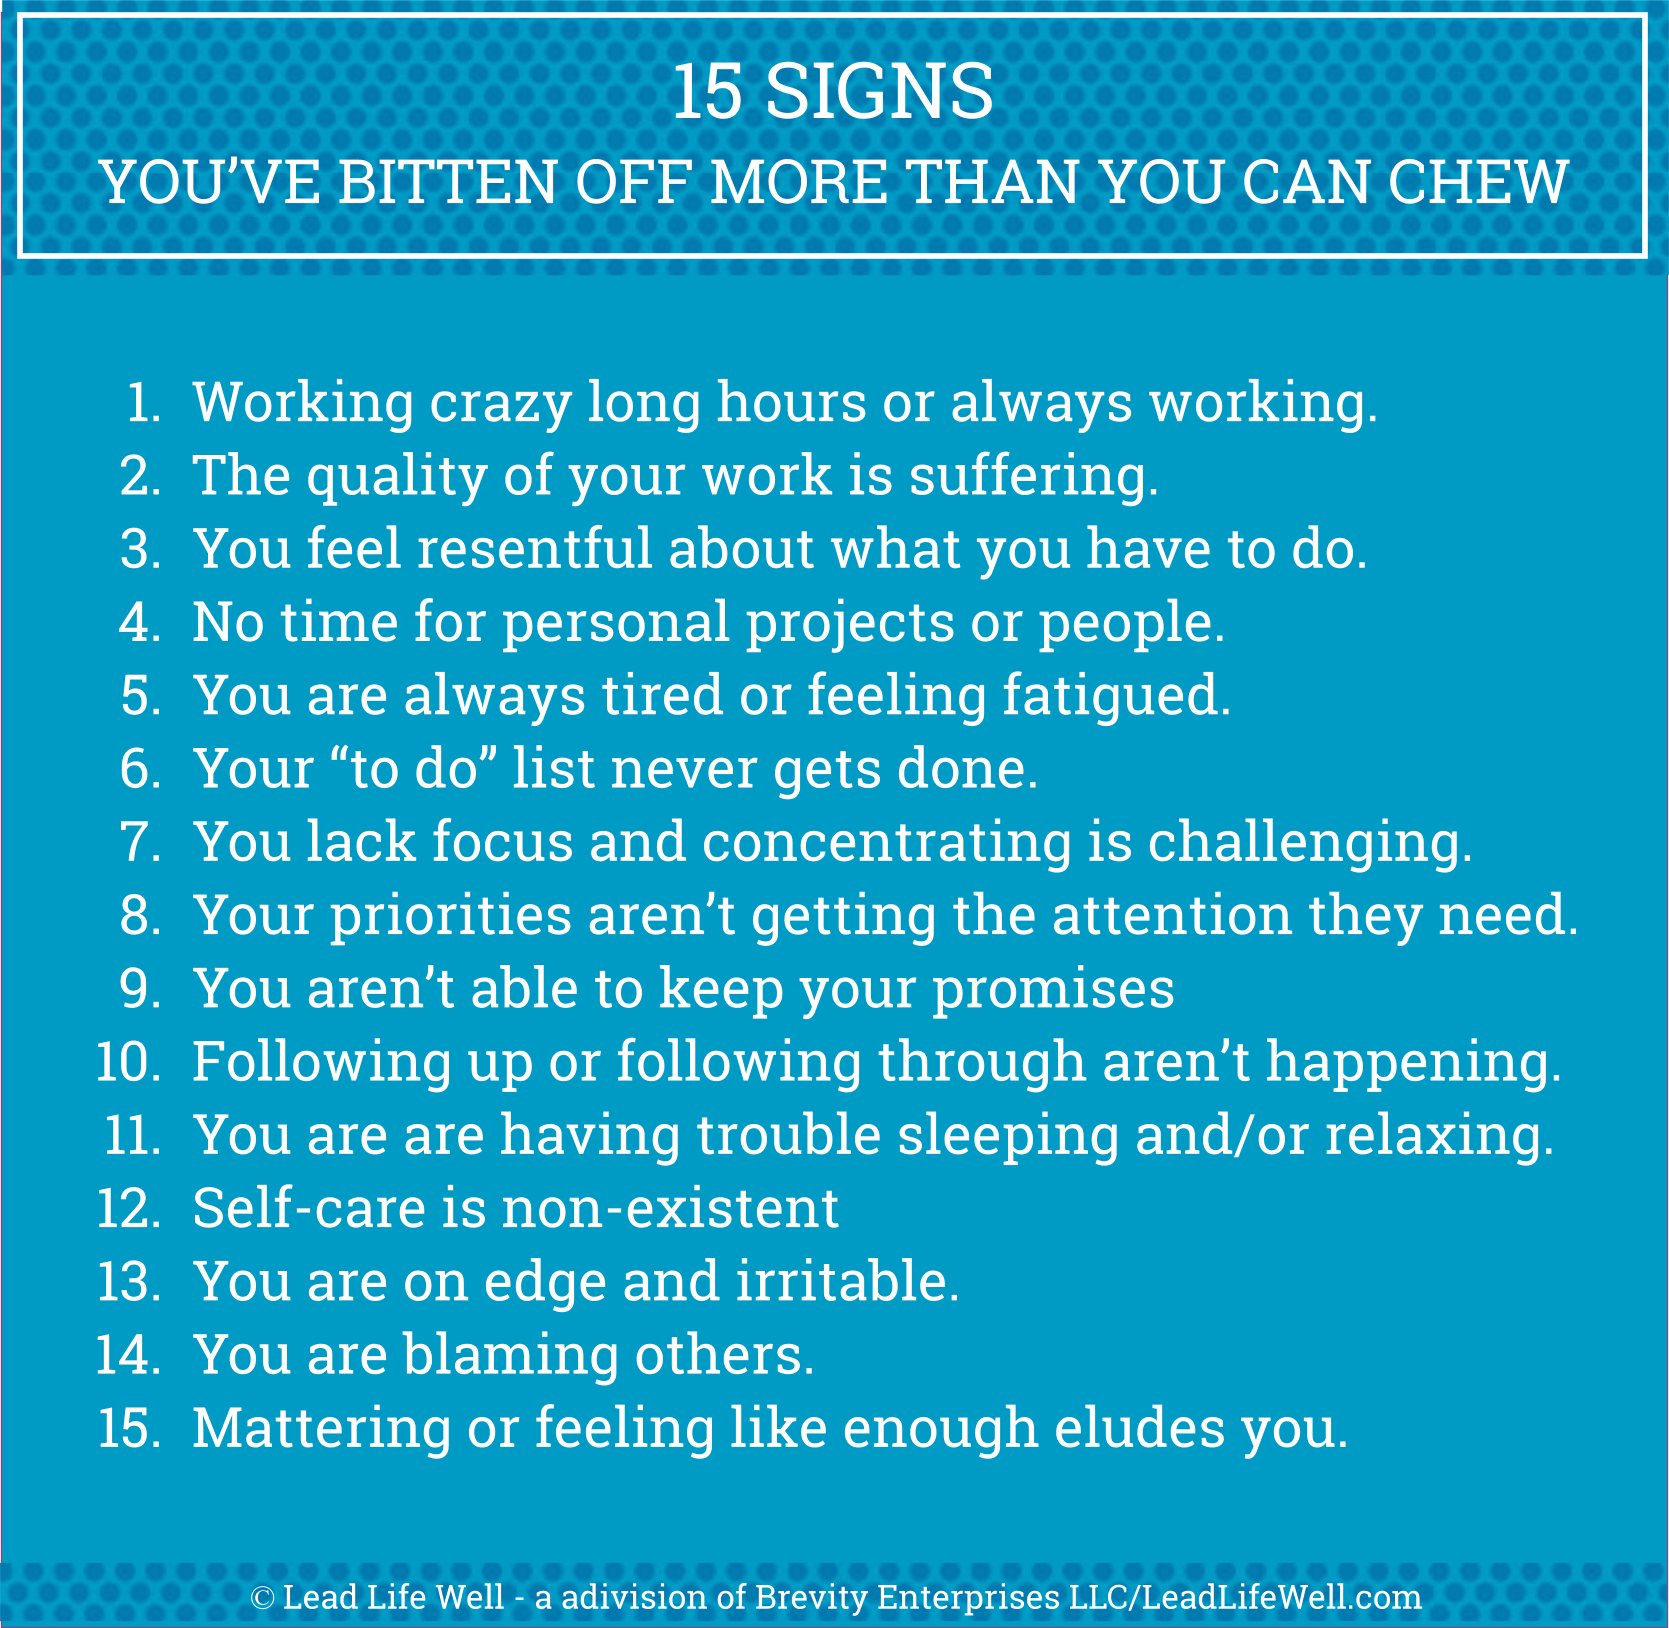 !5 Signs You've Bitten Off More Than You Can Chew! 